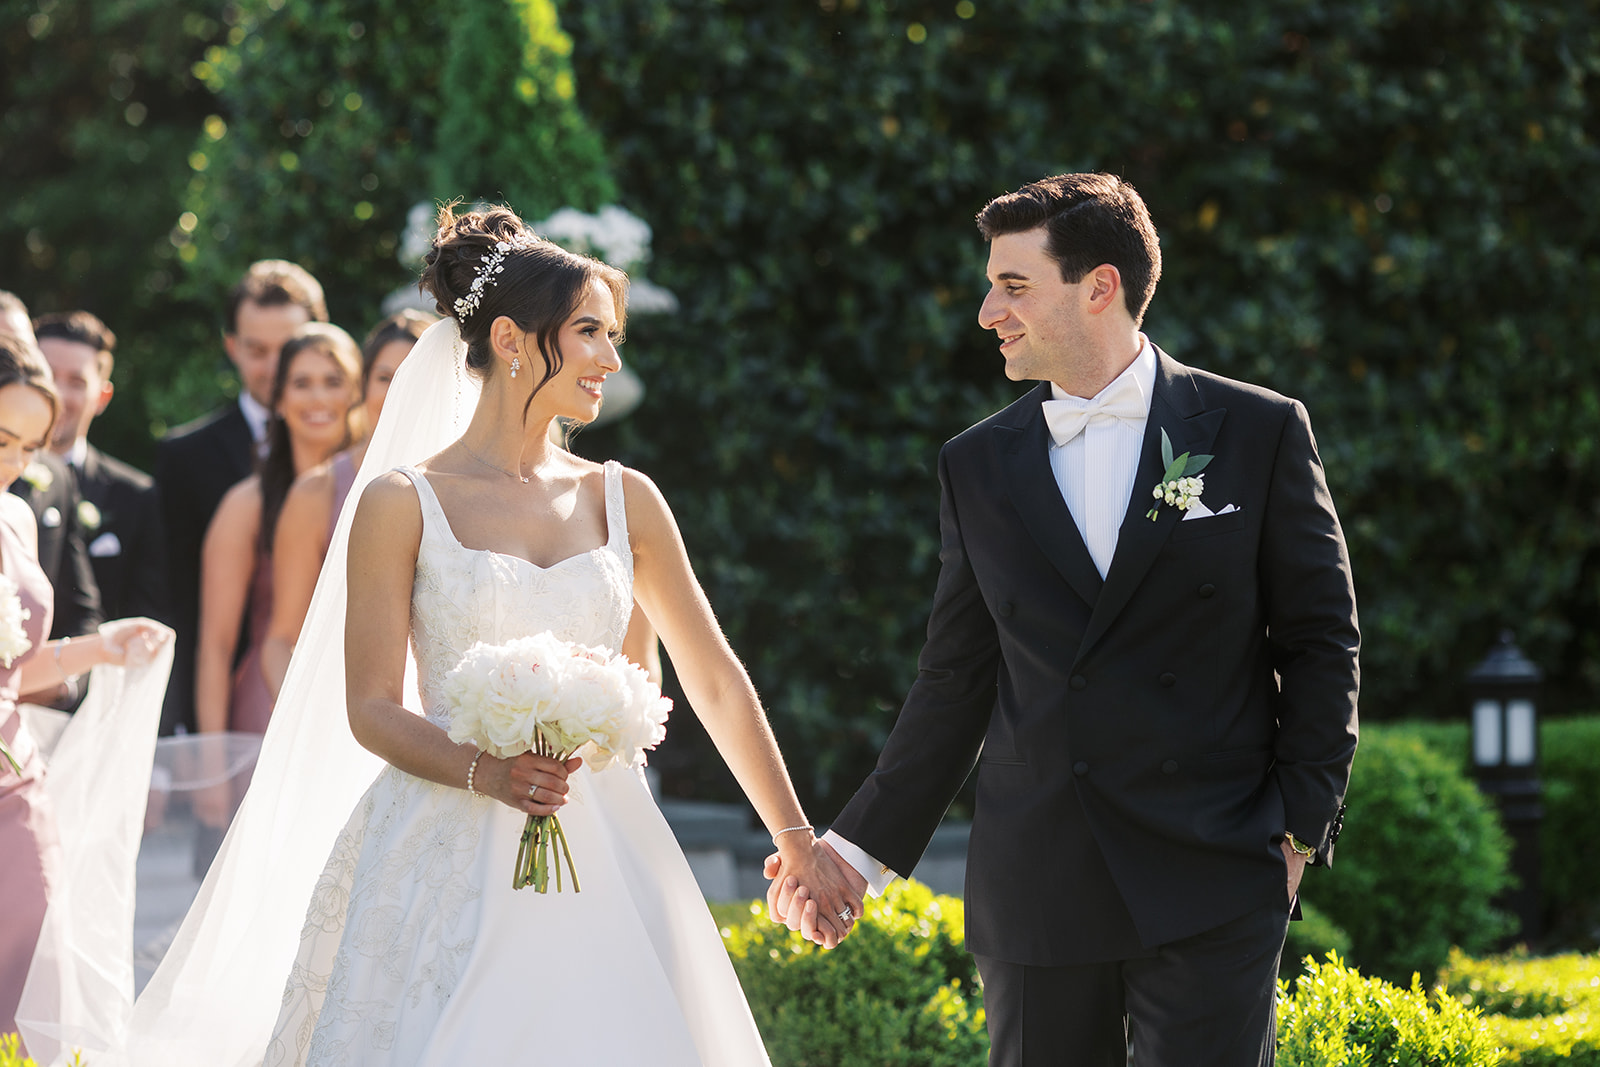 Newlyweds hold hands while smiling at each other and walking through one of the New Jersey Garden Wedding Venues with their wedding party behind them